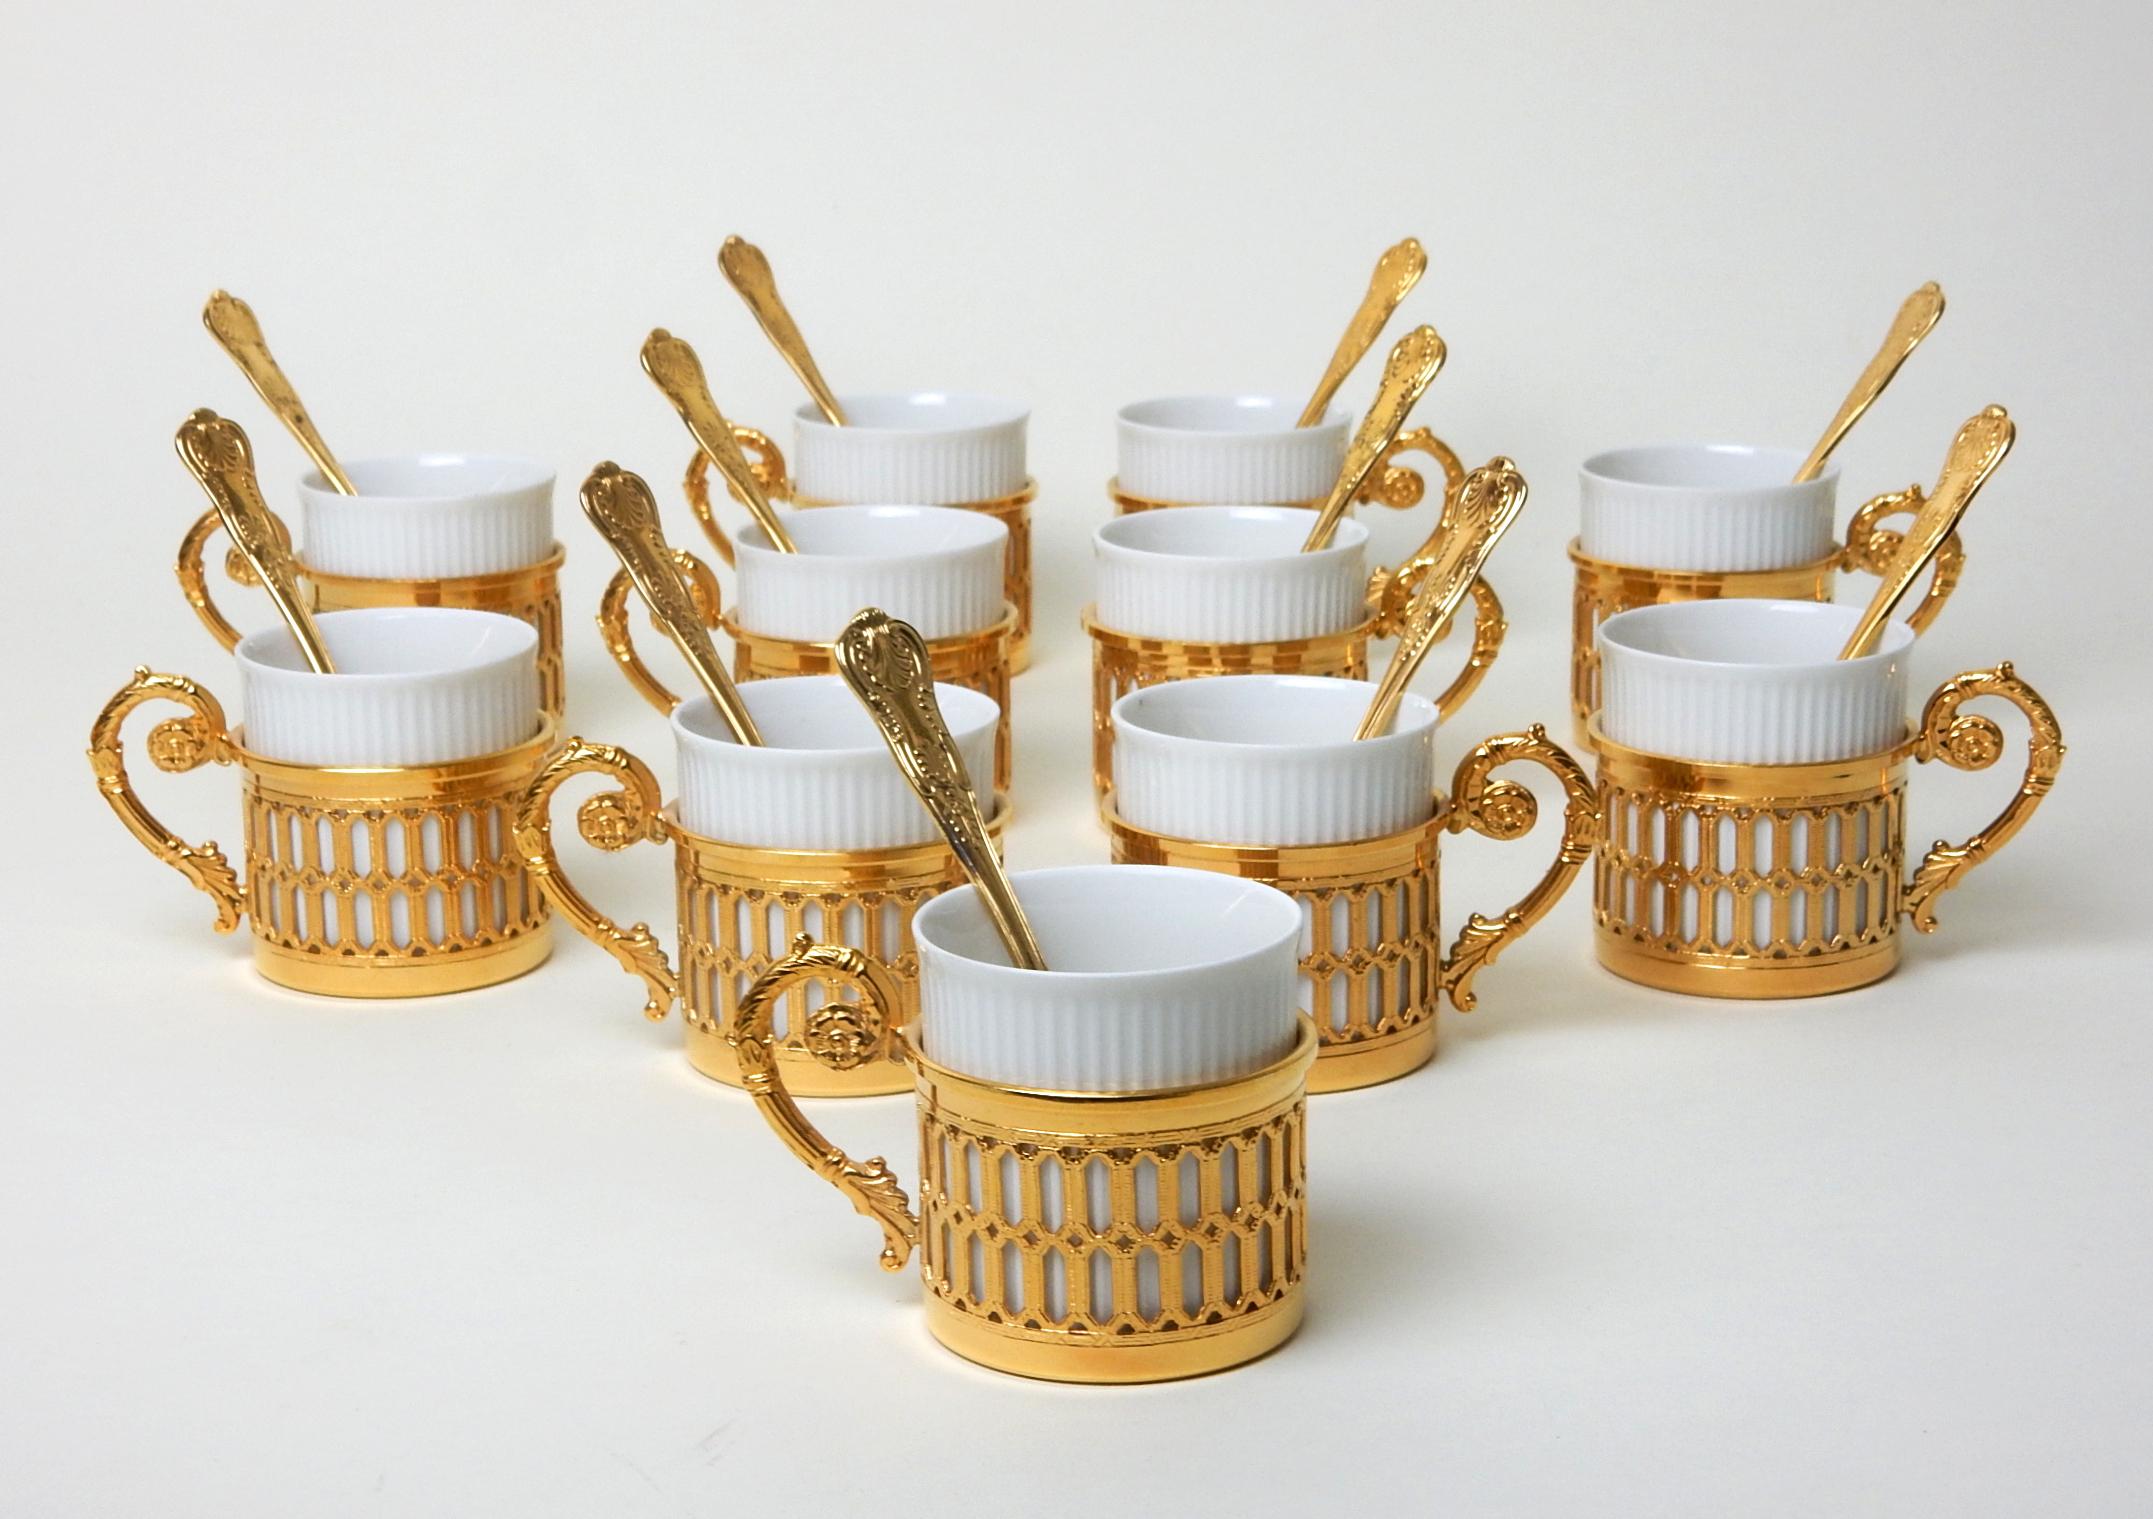 A truly divine set of 11 vintage espresso cups.
This set includes 11 Sheffield England spoons.
Gold plated shells marked 